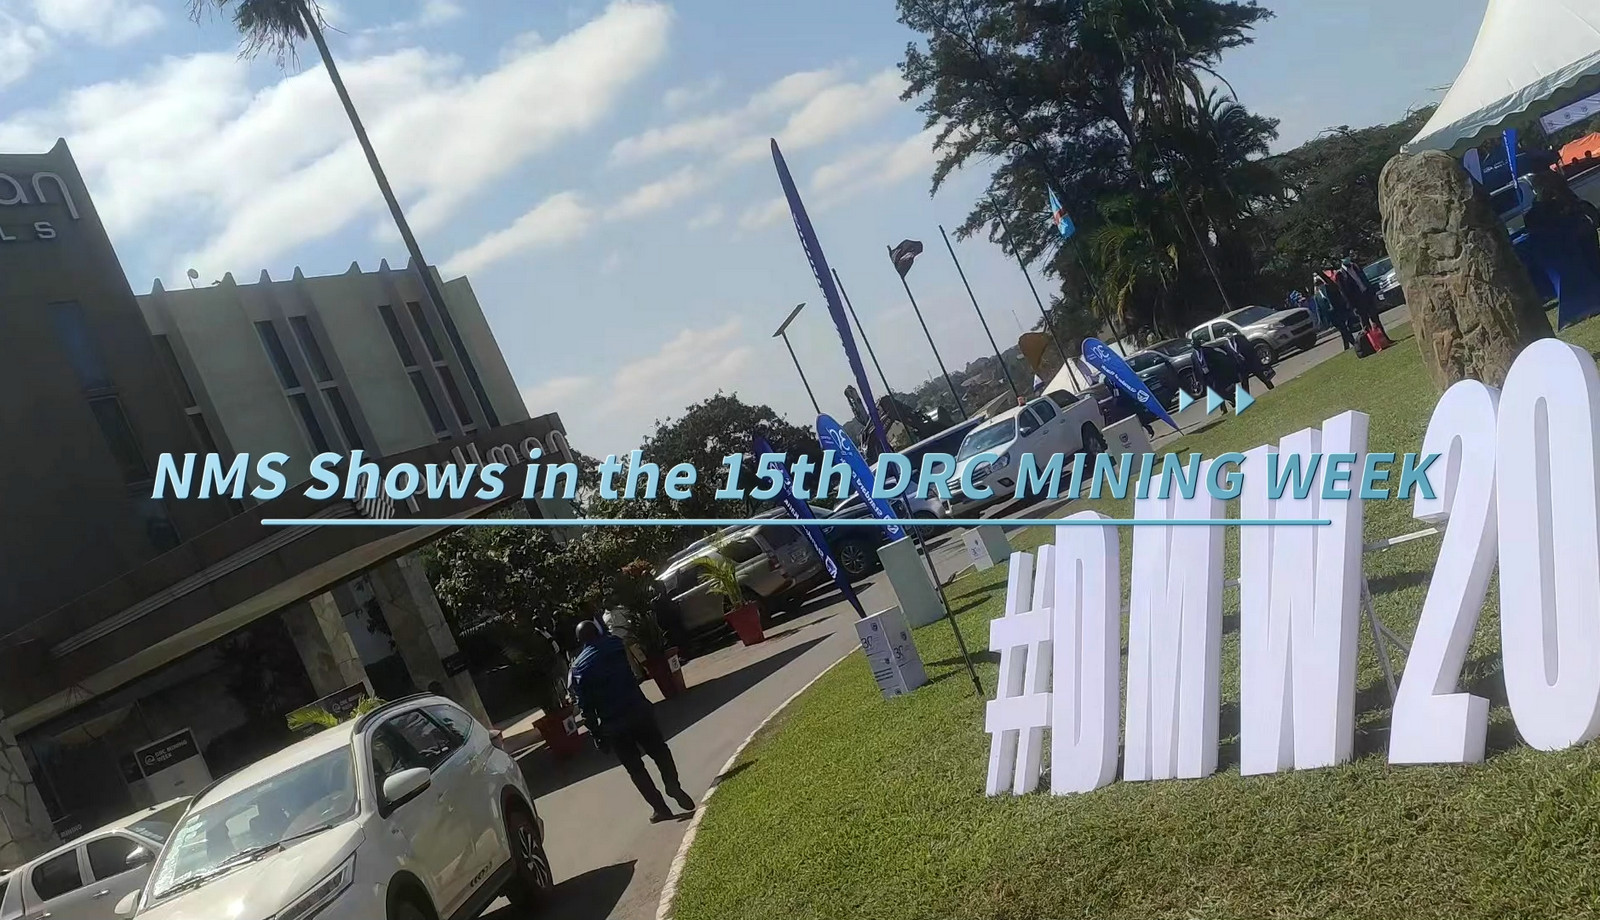 NMS Shows in the 15th DRC MINING WEEK